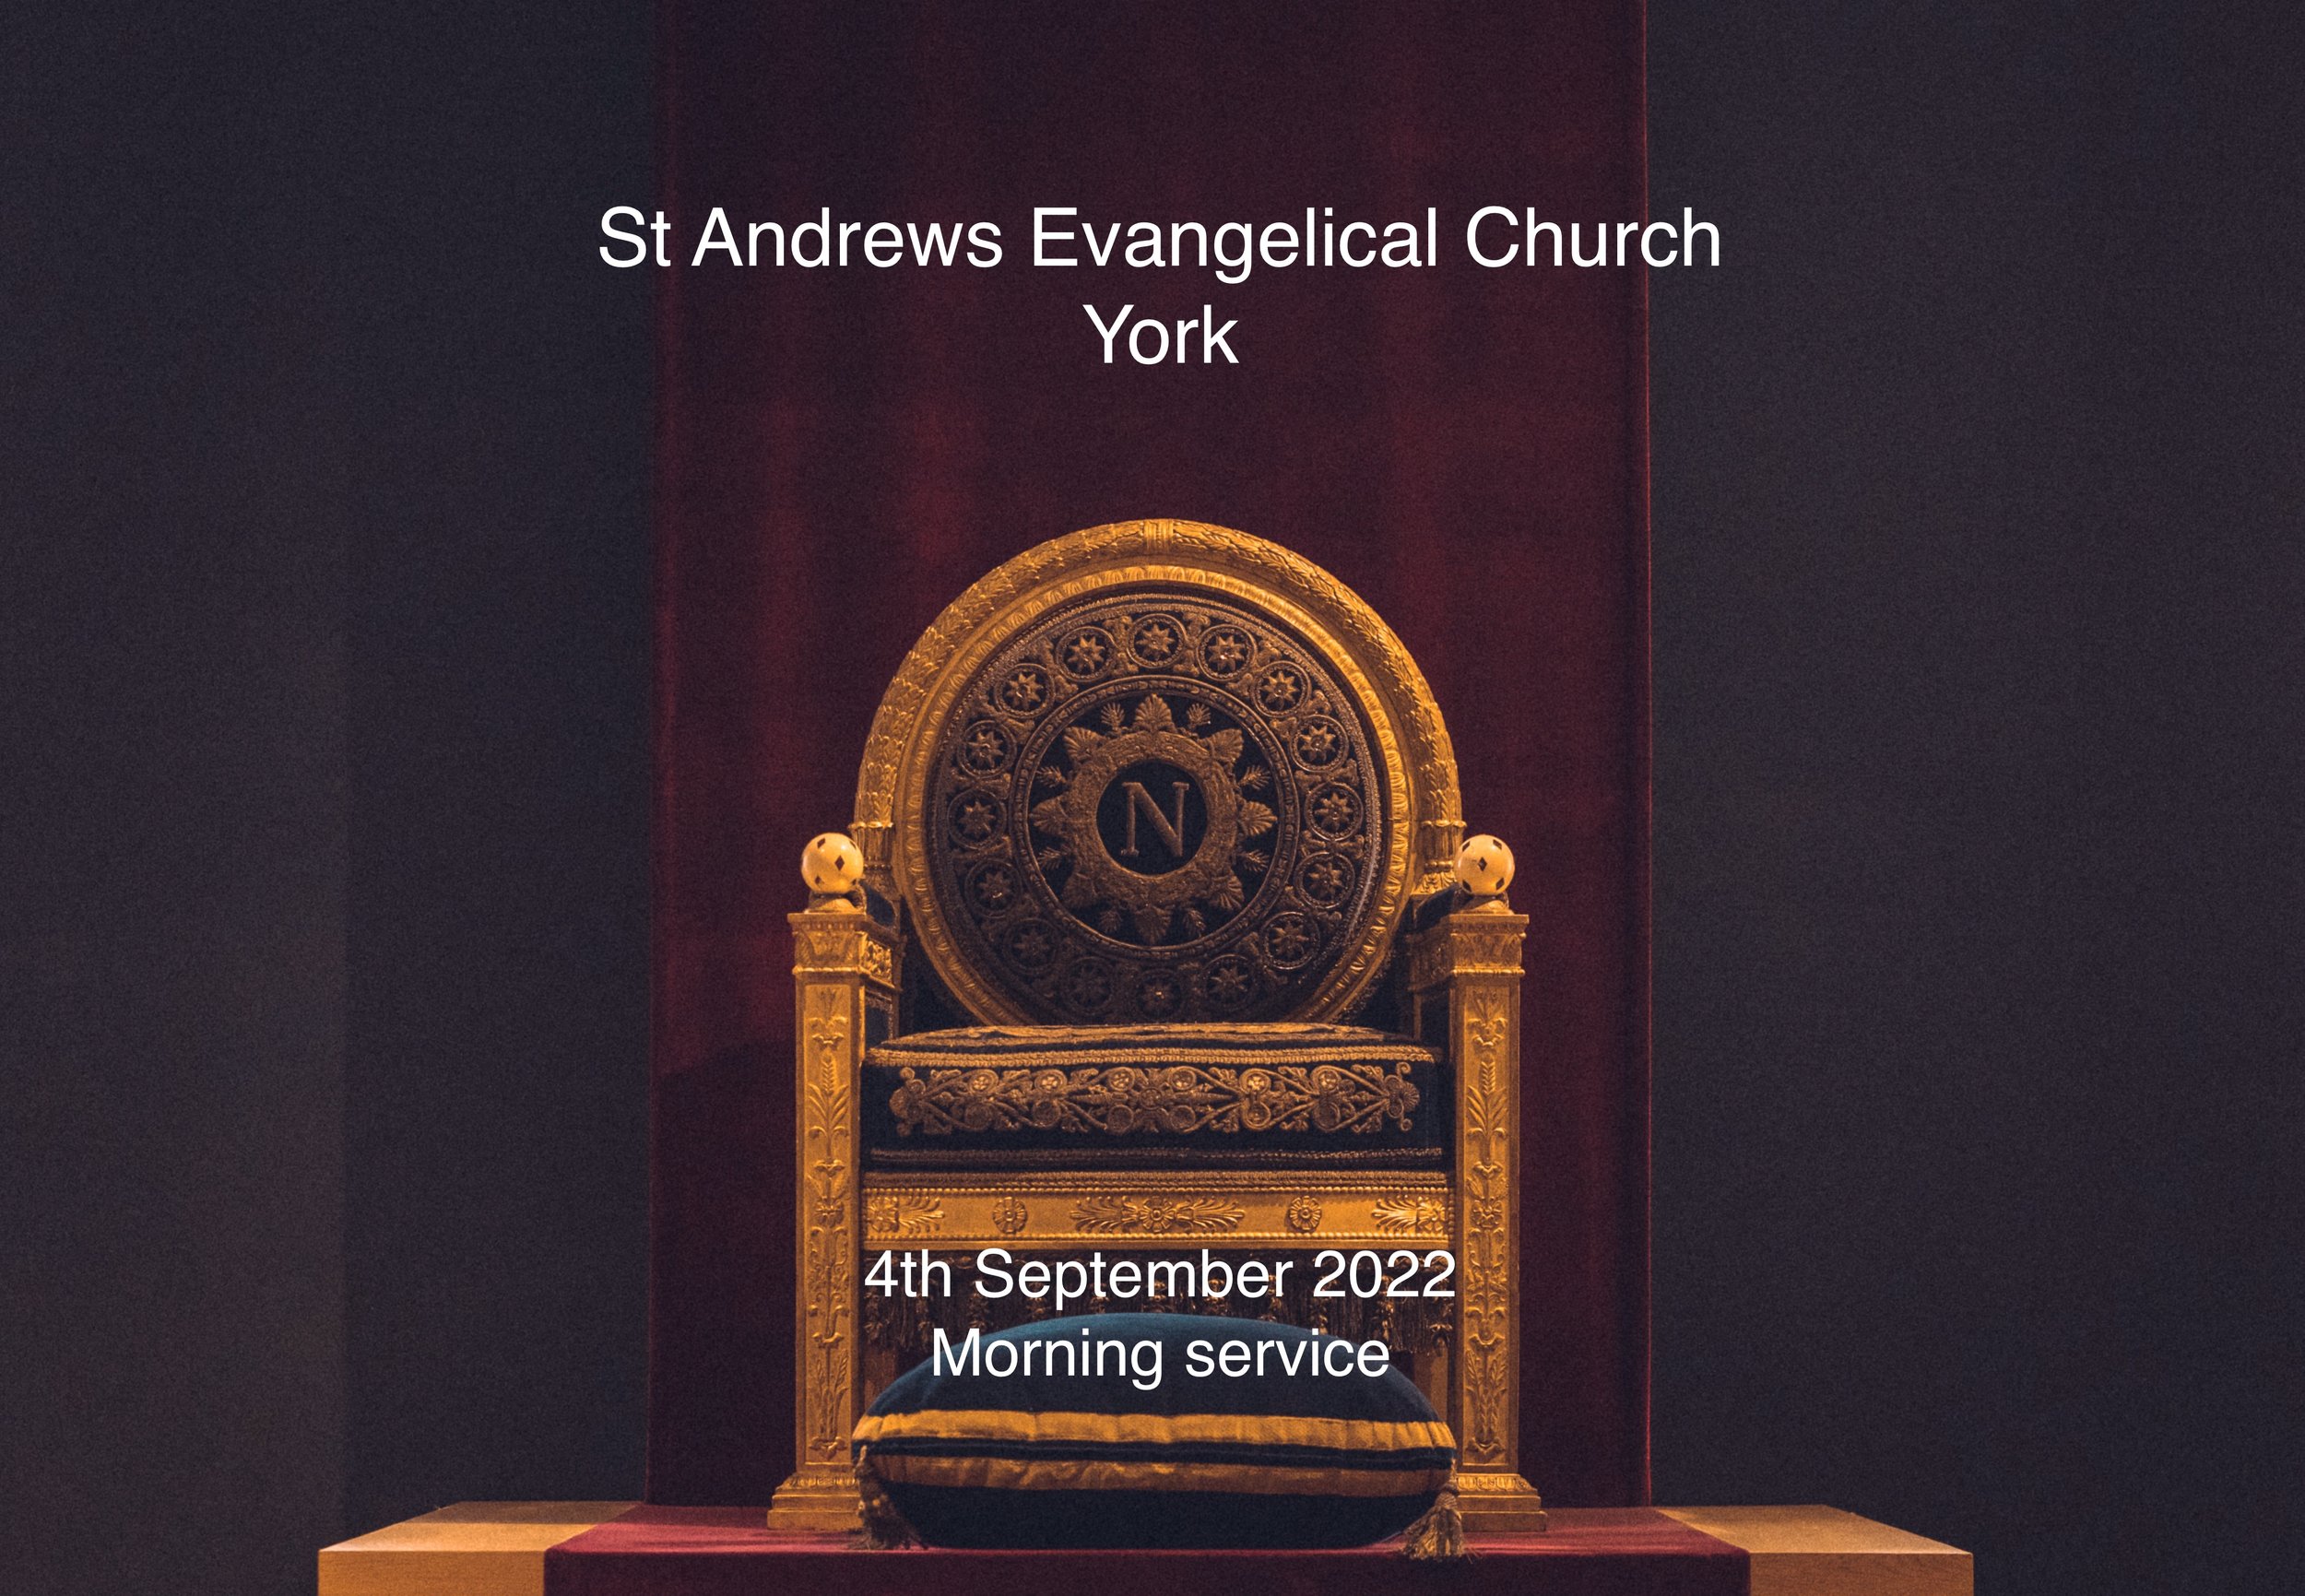 Andrew Coleclough: Morning service